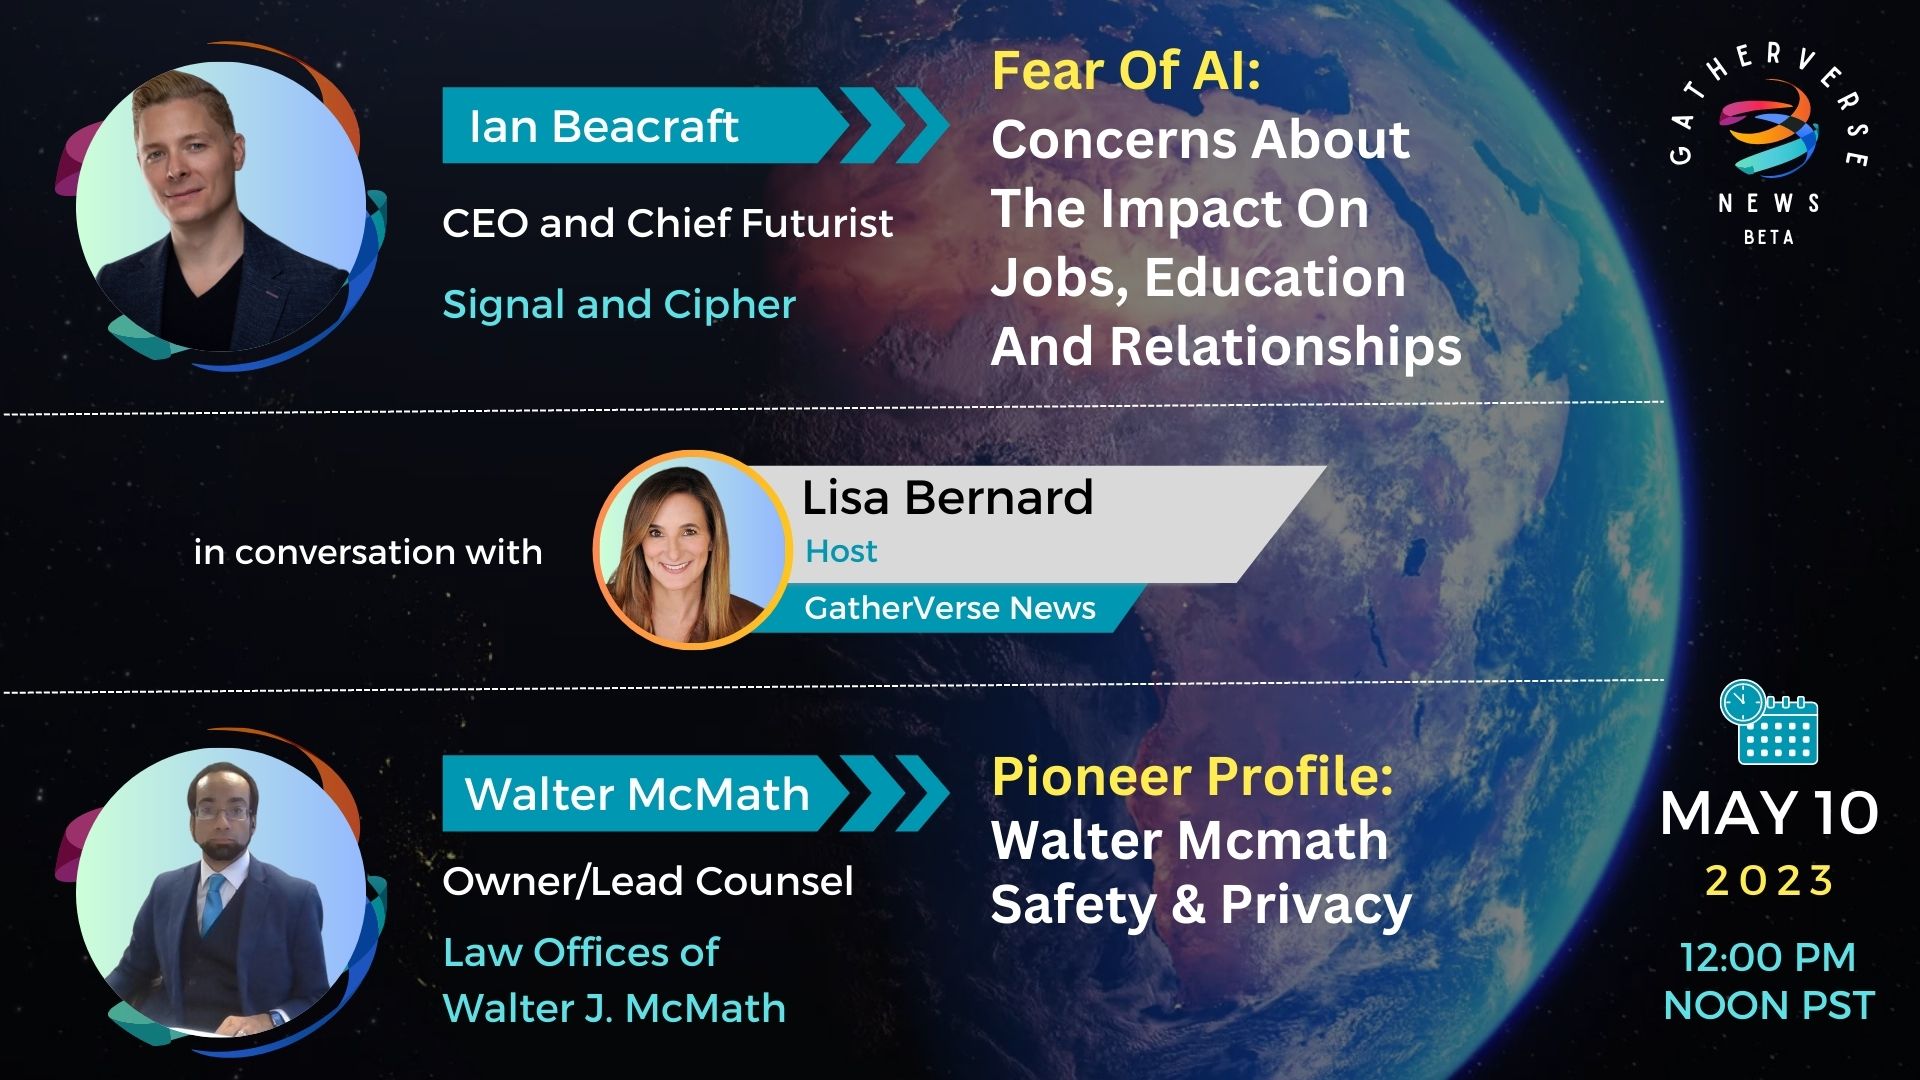 Fear Of AI-Concerns About The Impact On Jobs, Education And Relationships